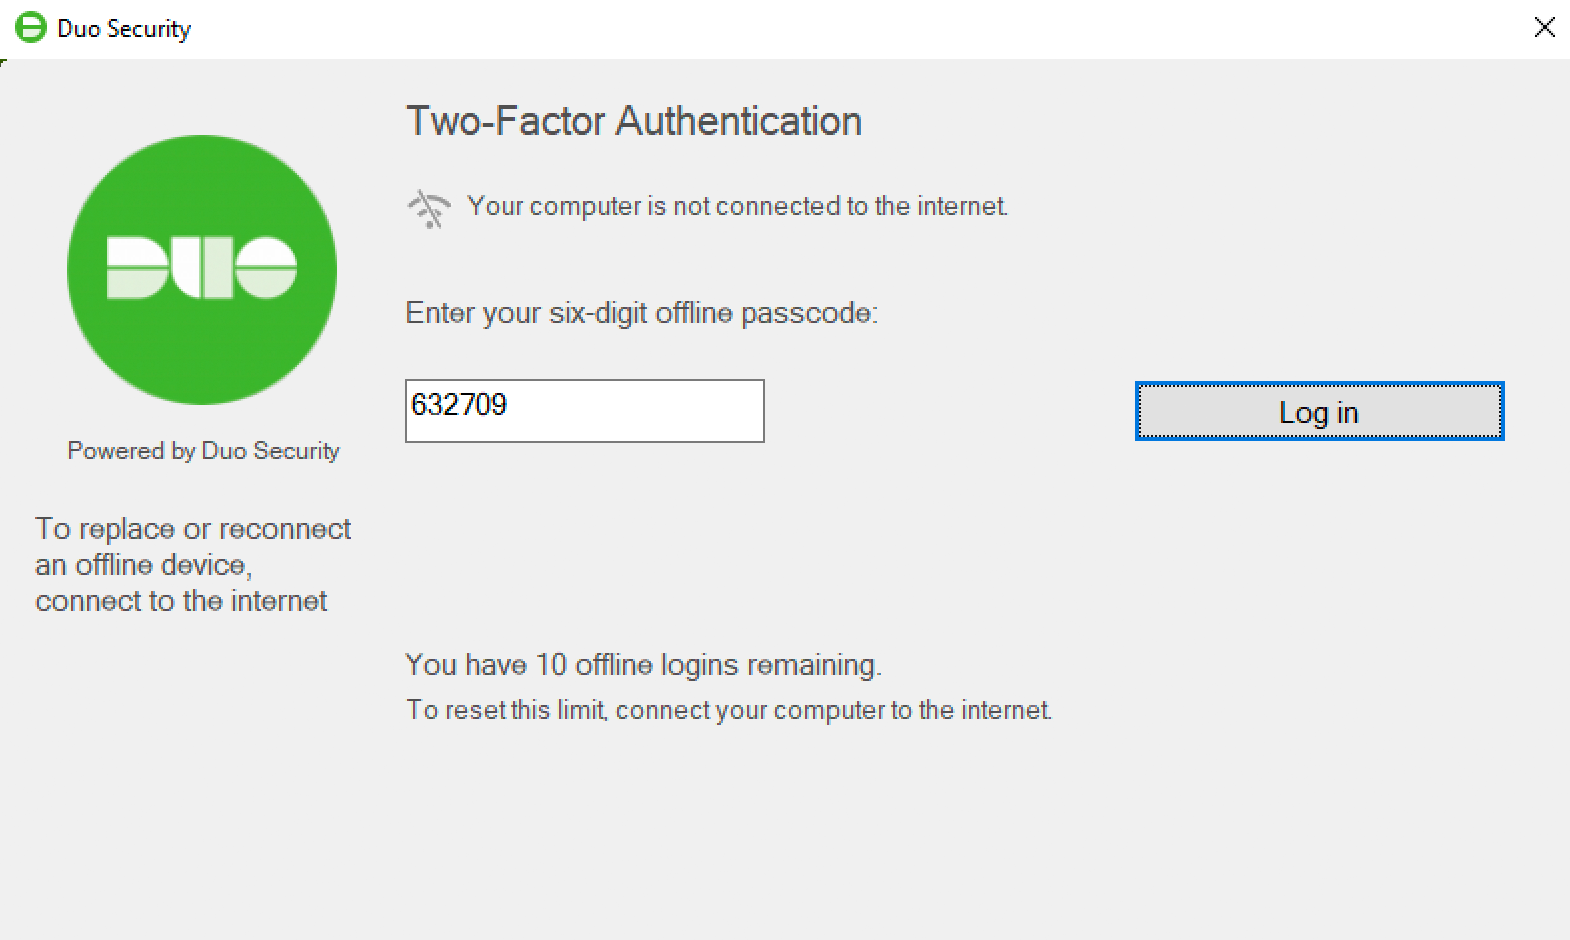 Duo Offline Authentication with Duo Mobile Passcode